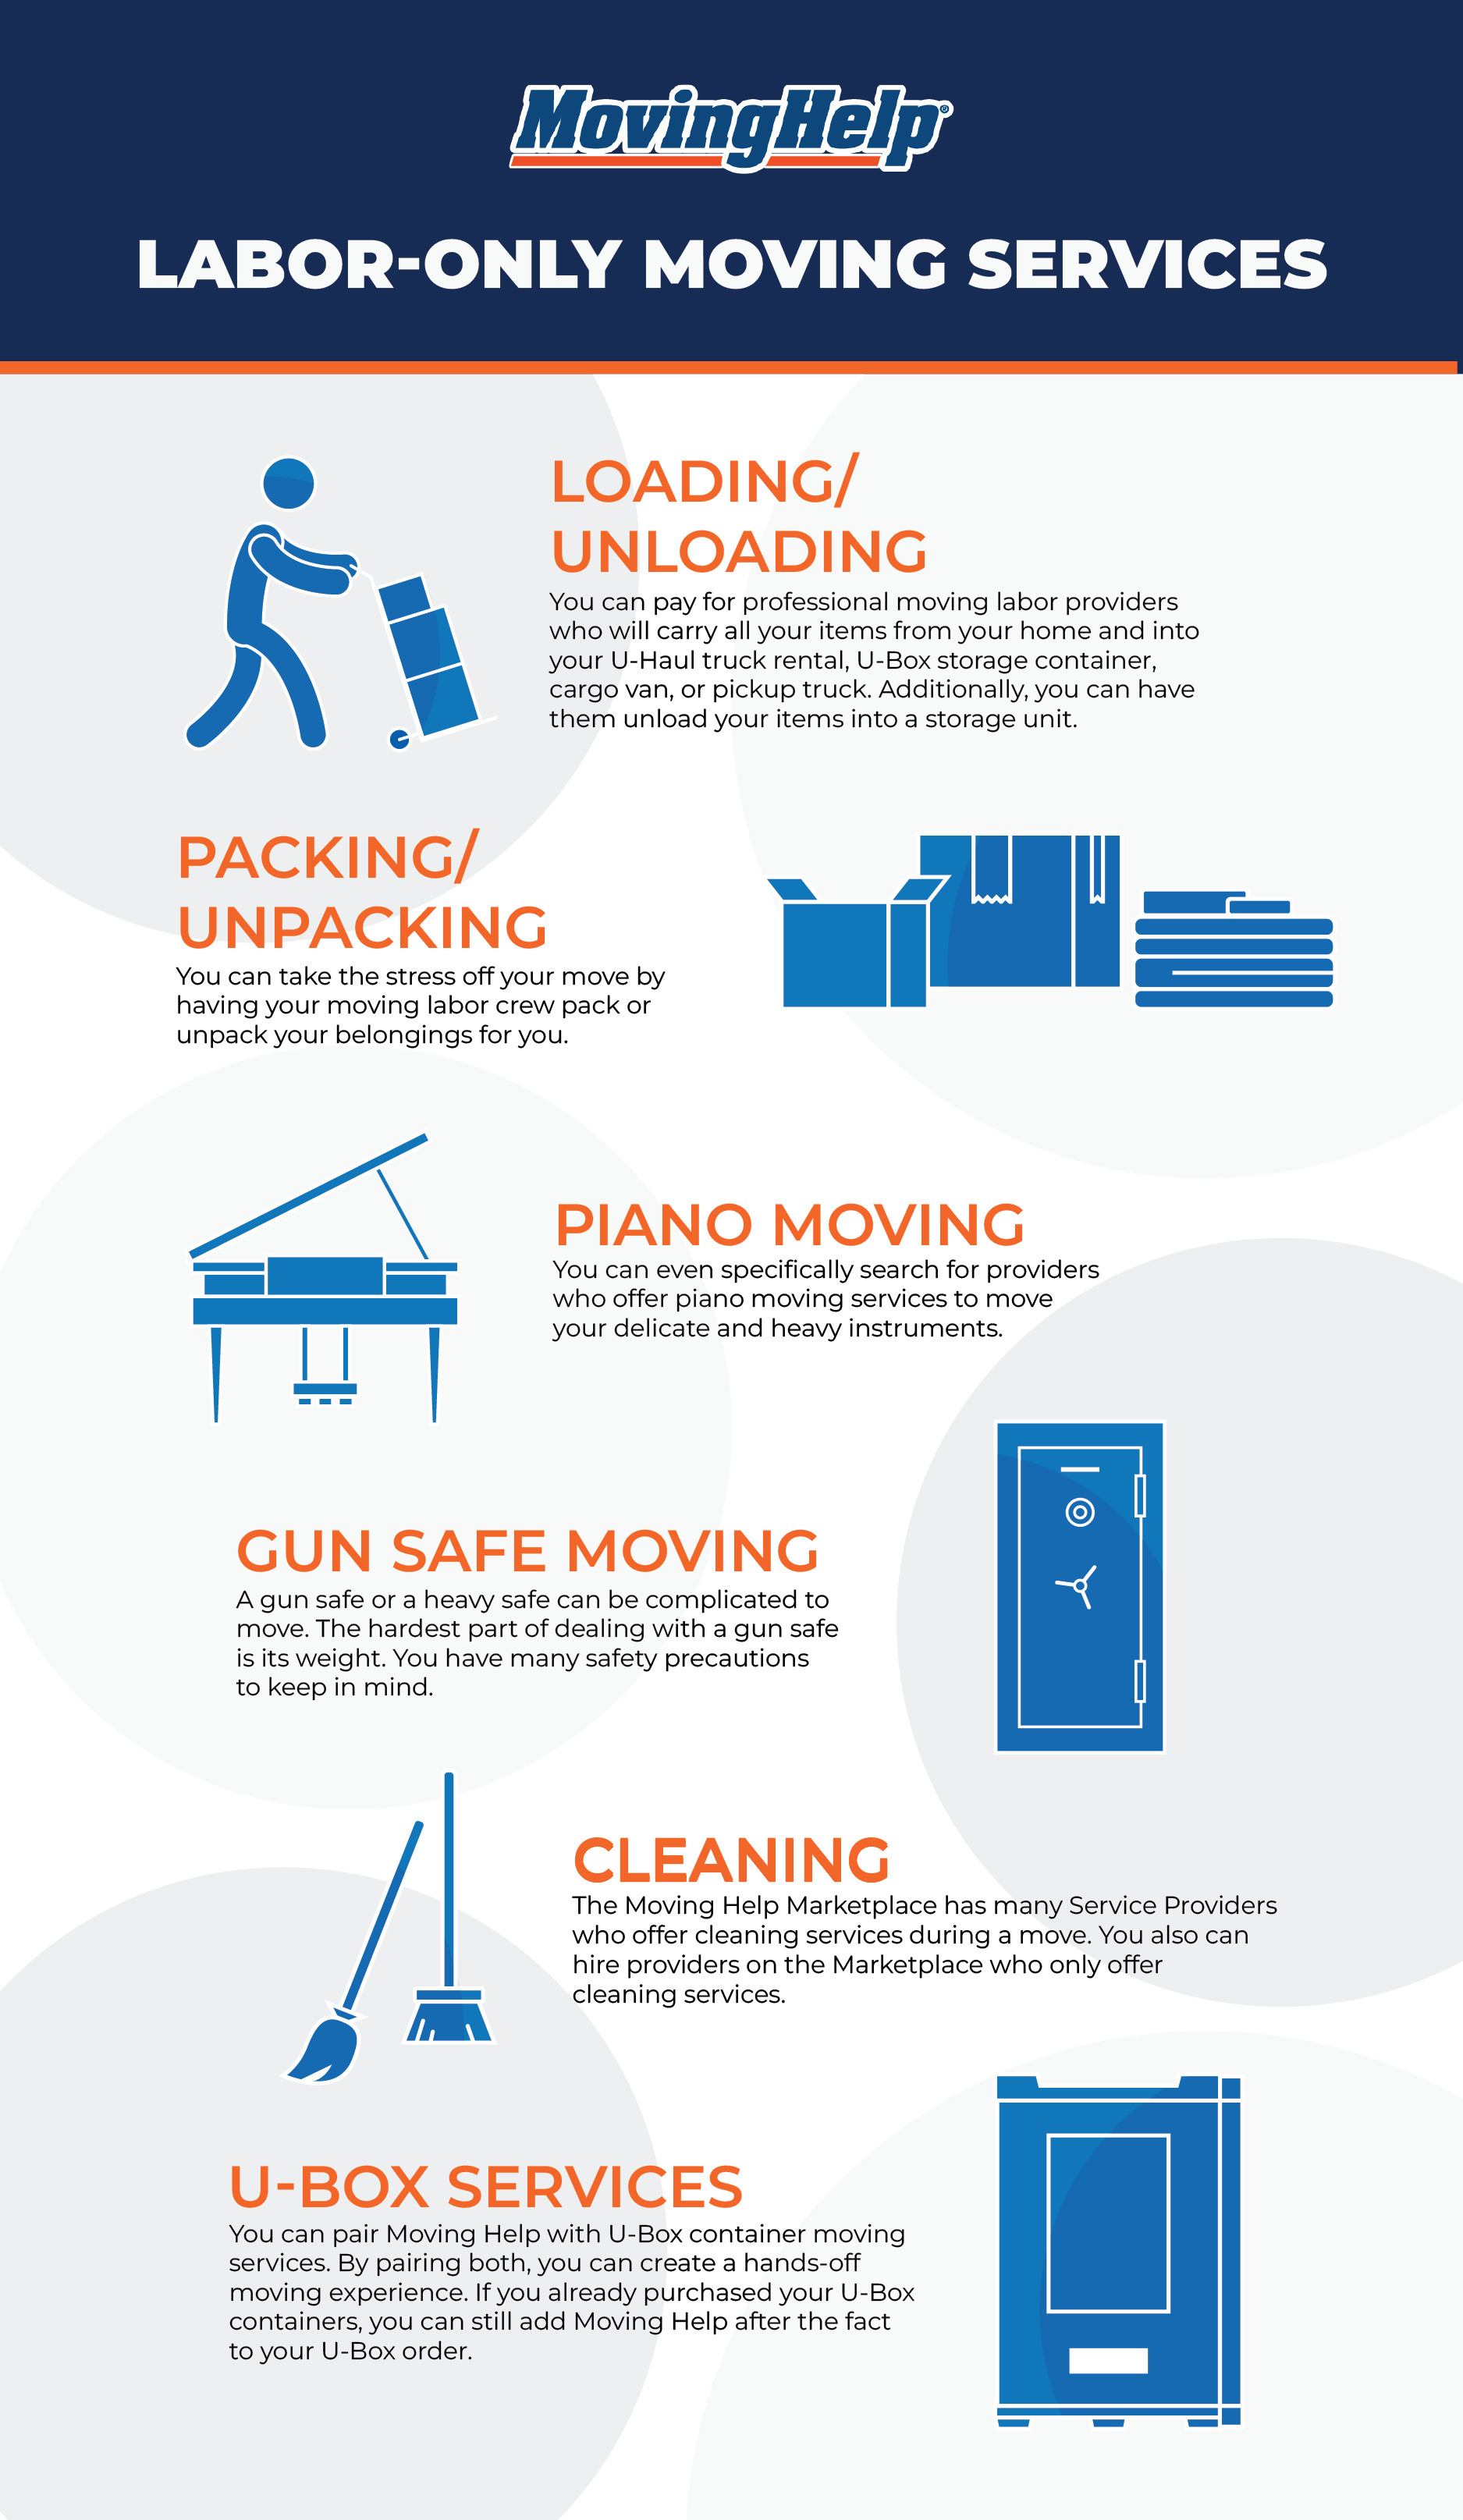 Labor-Only Moving Services Moving Help® Offers - Moving Help®